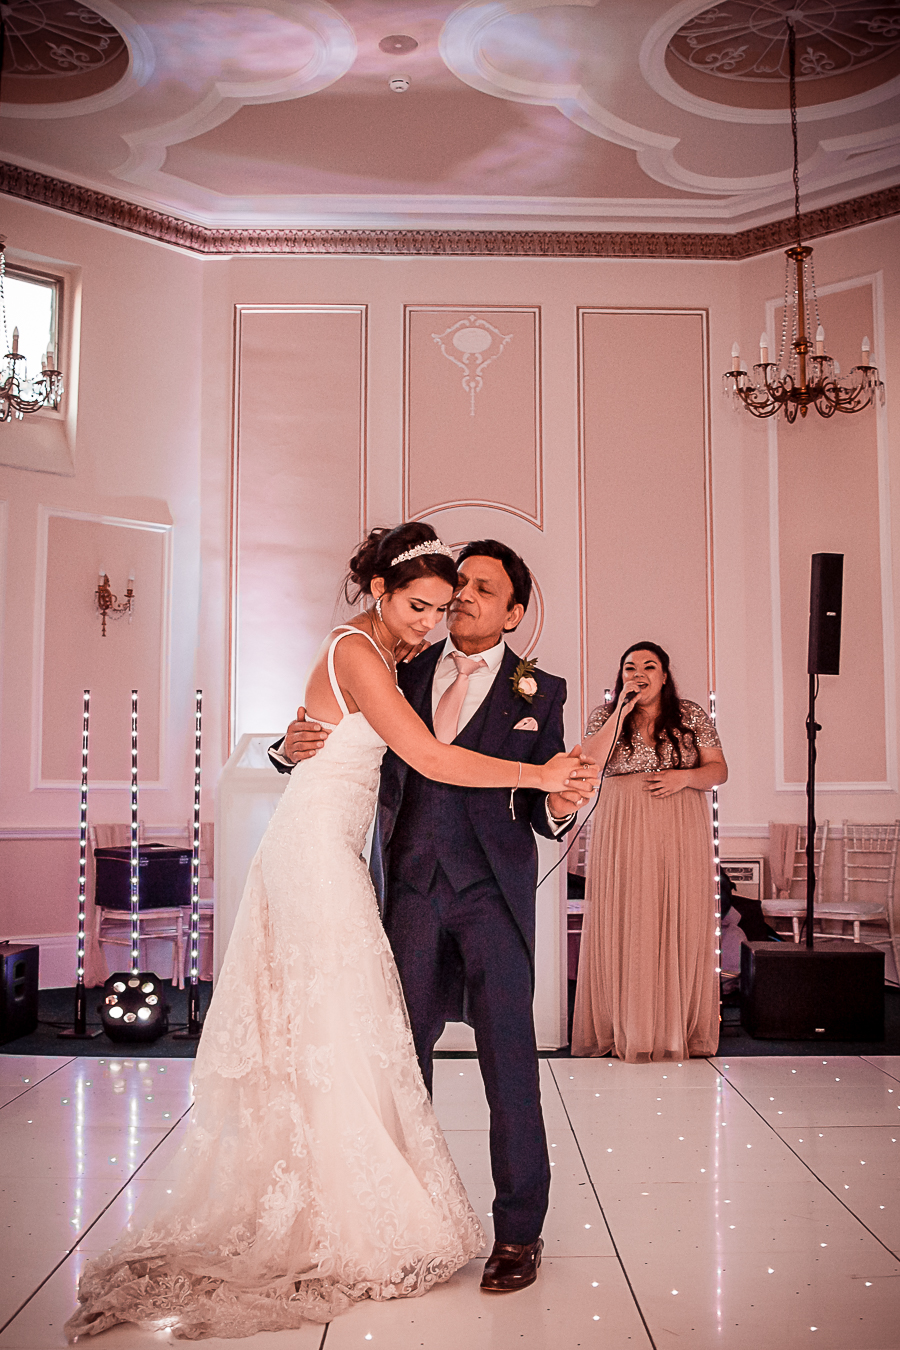 Real wedding at Chateau Impney classic glamorous style, Nicholas Rogers Photography (41)